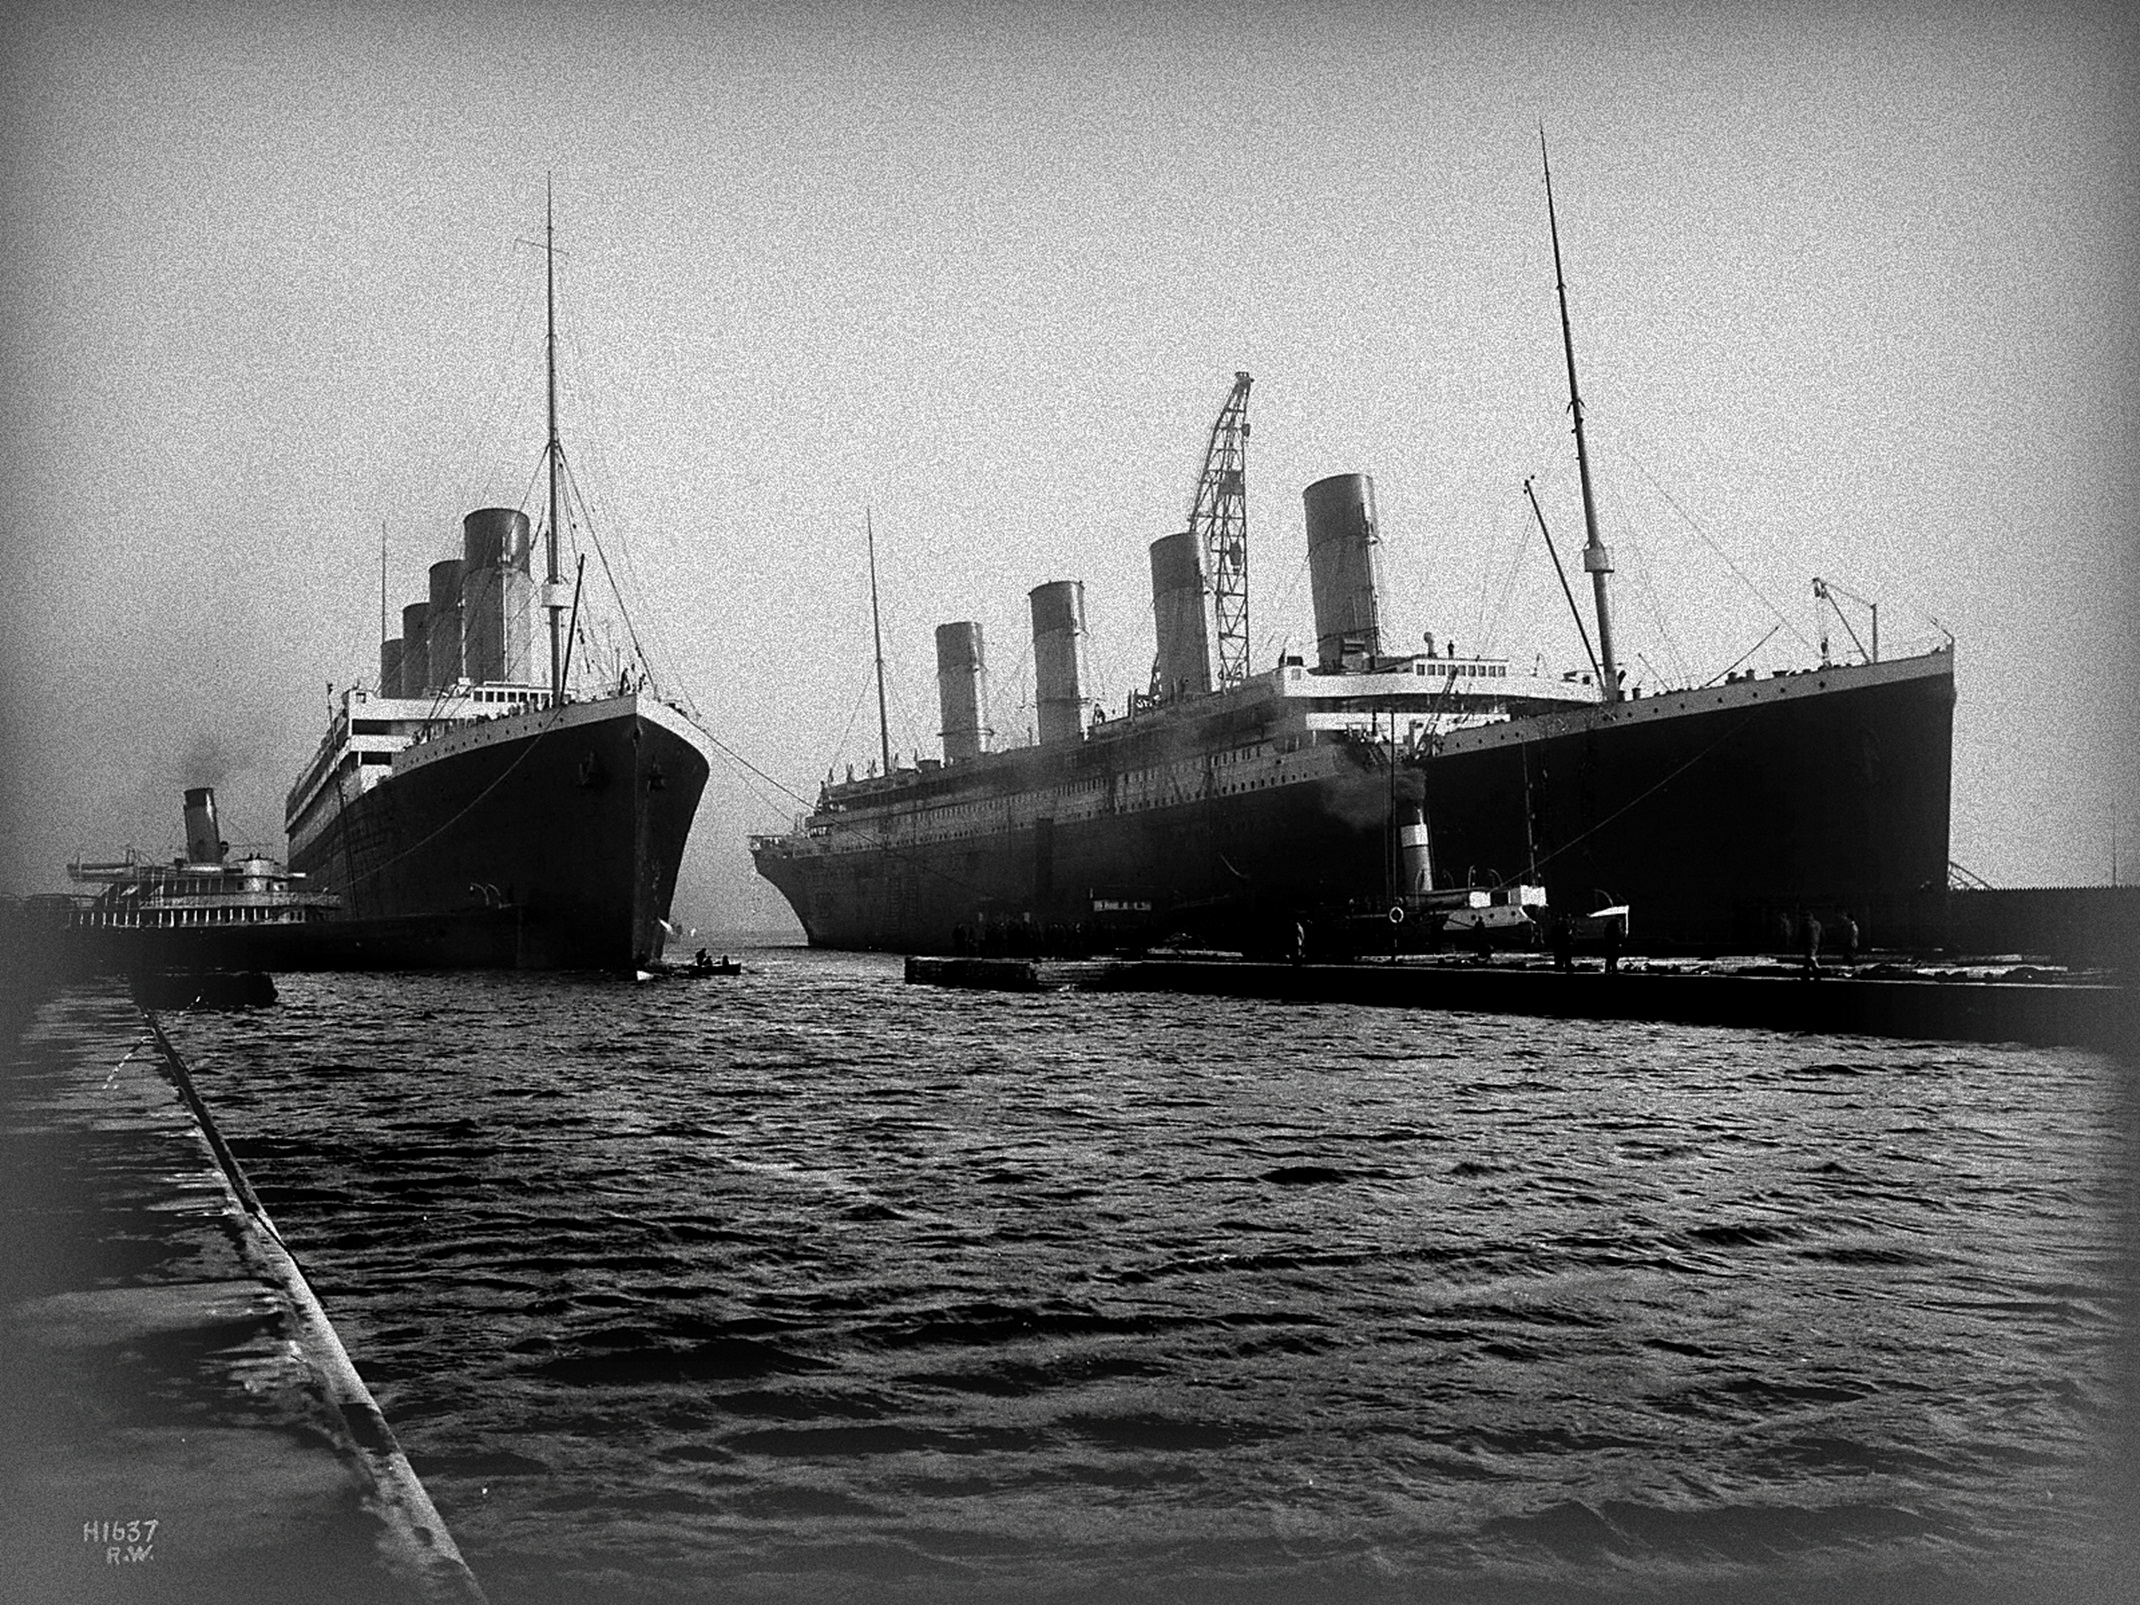 Olympic and Titanic